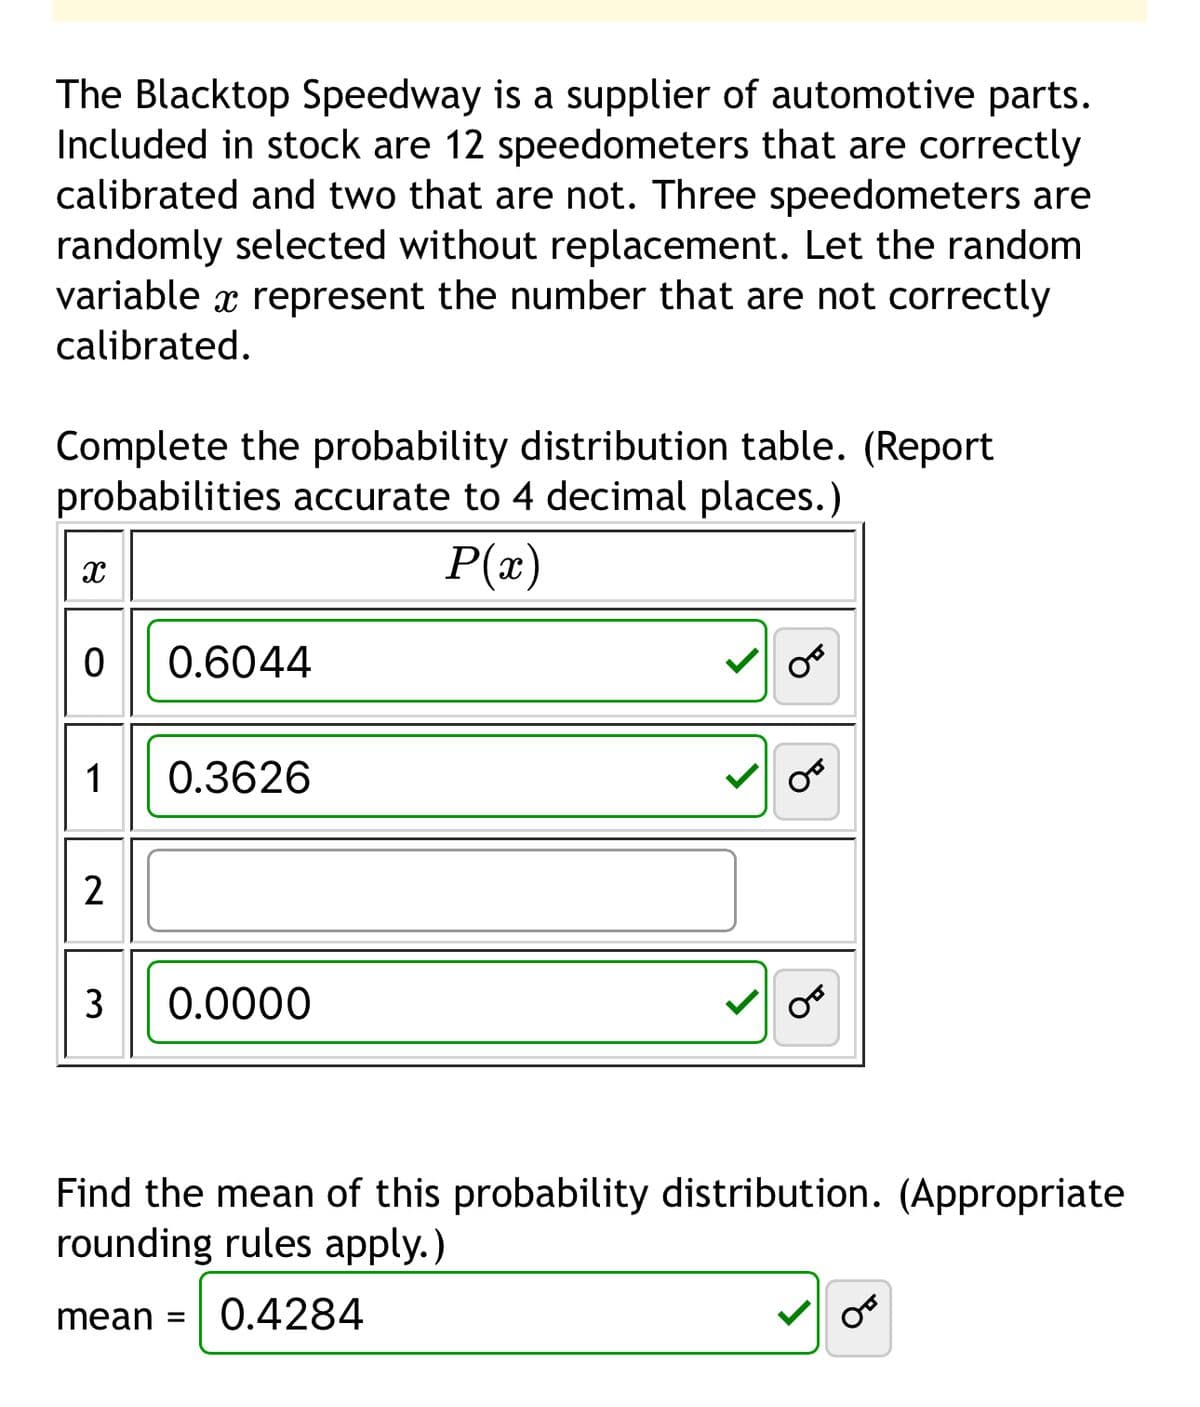 The Blacktop Speedway is a supplier of automotive parts.
Included in stock are 12 speedometers that are correctly
calibrated and two that are not. Three speedometers are
randomly selected without replacement. Let the random
variable x represent the number that are not correctly
calibrated.
Complete the probability distribution table. (Report
probabilities accurate to 4 decimal places.)
x
P(x)
0 0.6044
1 0.3626
2
3 0.0000
من
من
می
Find the mean of this probability distribution. (Appropriate
rounding rules apply.)
mean =
0.4284
من